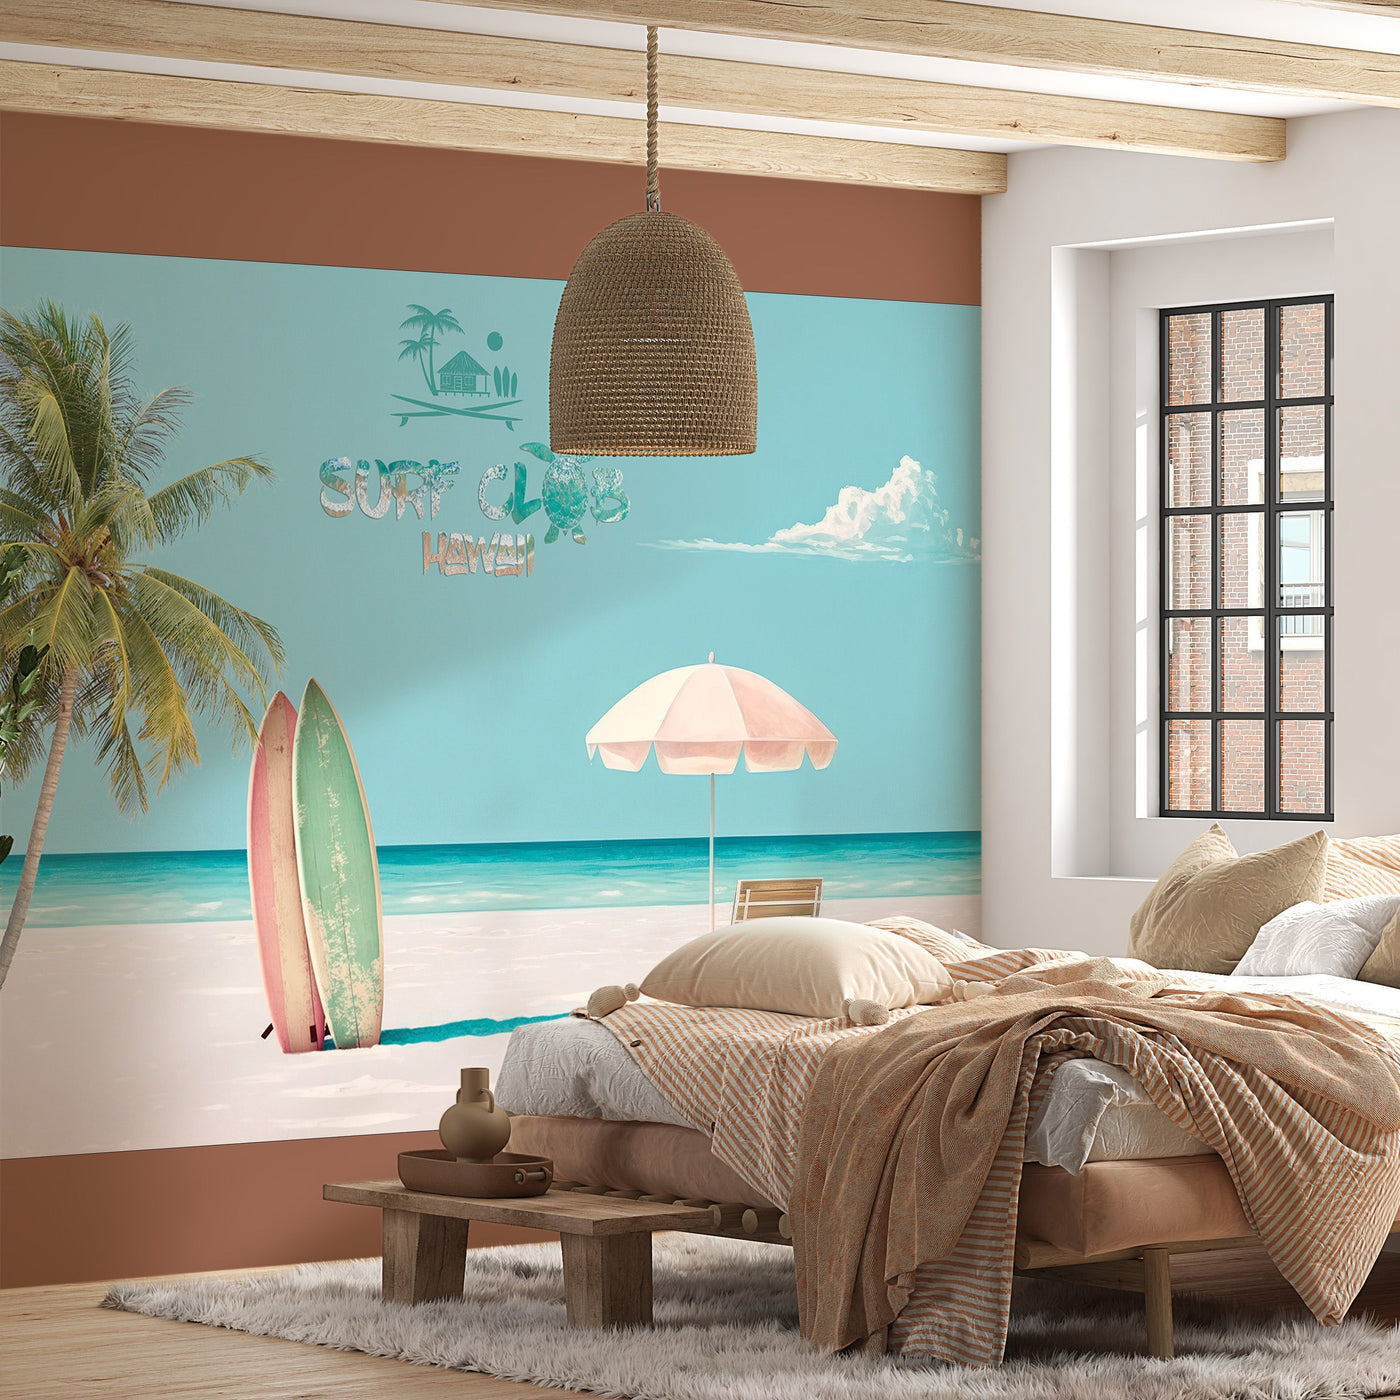 Peel & Stick Tropical Wall Mural - Surf Club Hawaii - Removable Wall Decals-Tiptophomedecor